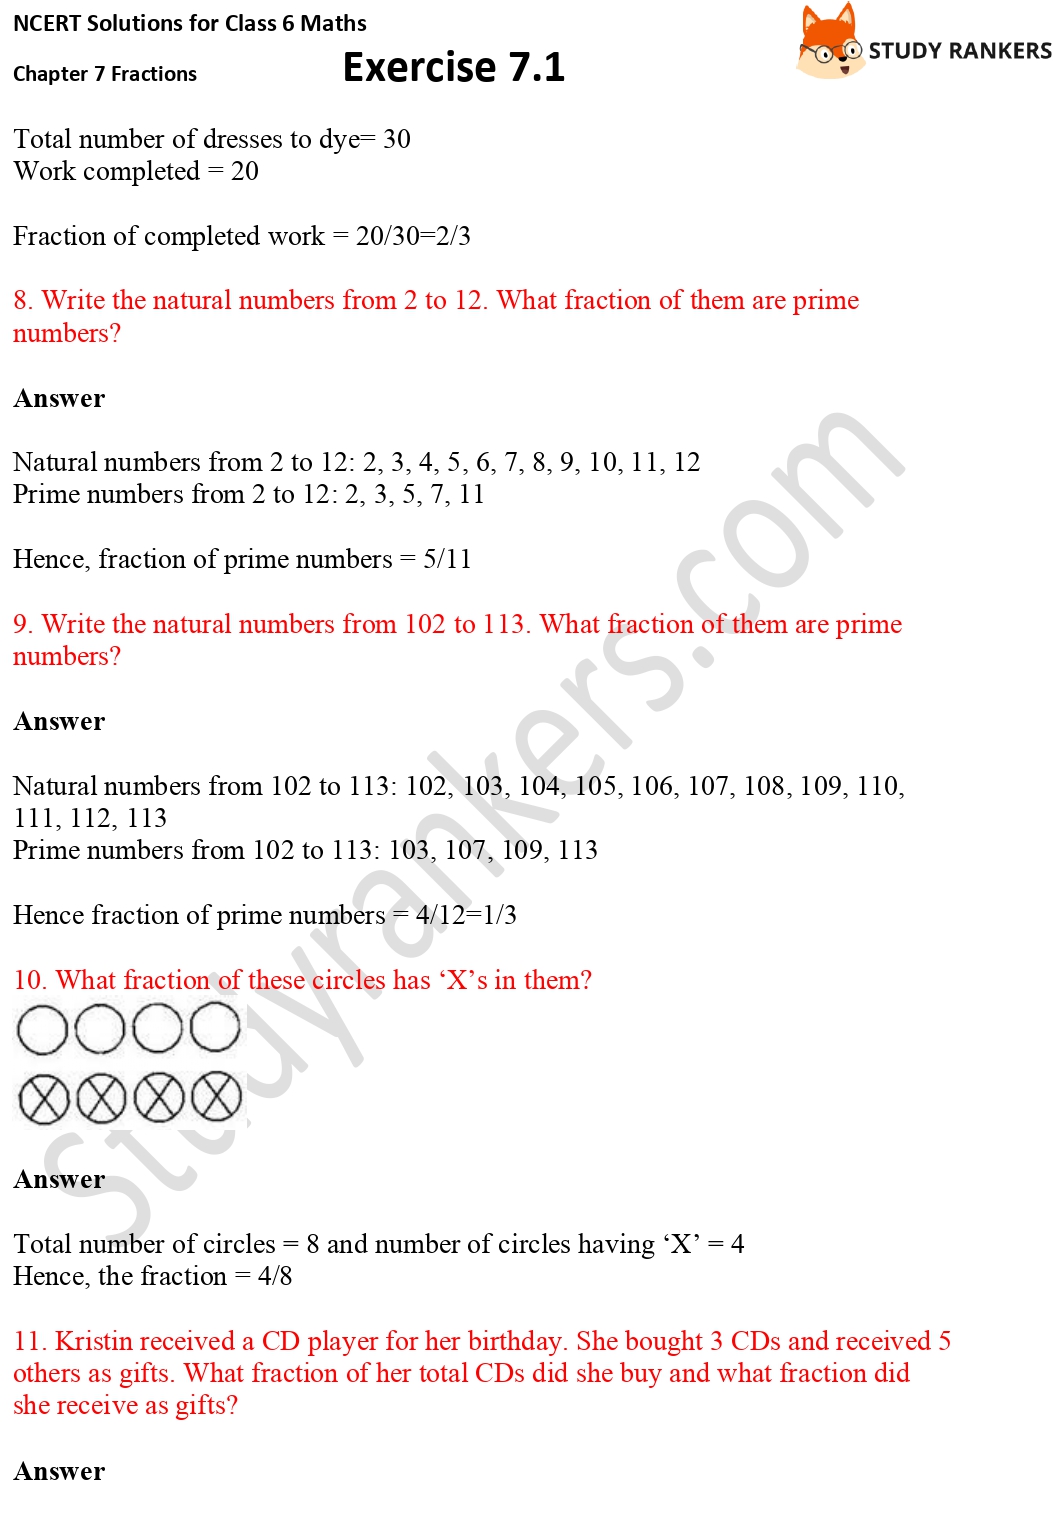 NCERT Solutions for Class 6 Maths Chapter 7 Fractions Exercise 7.1 Part 3